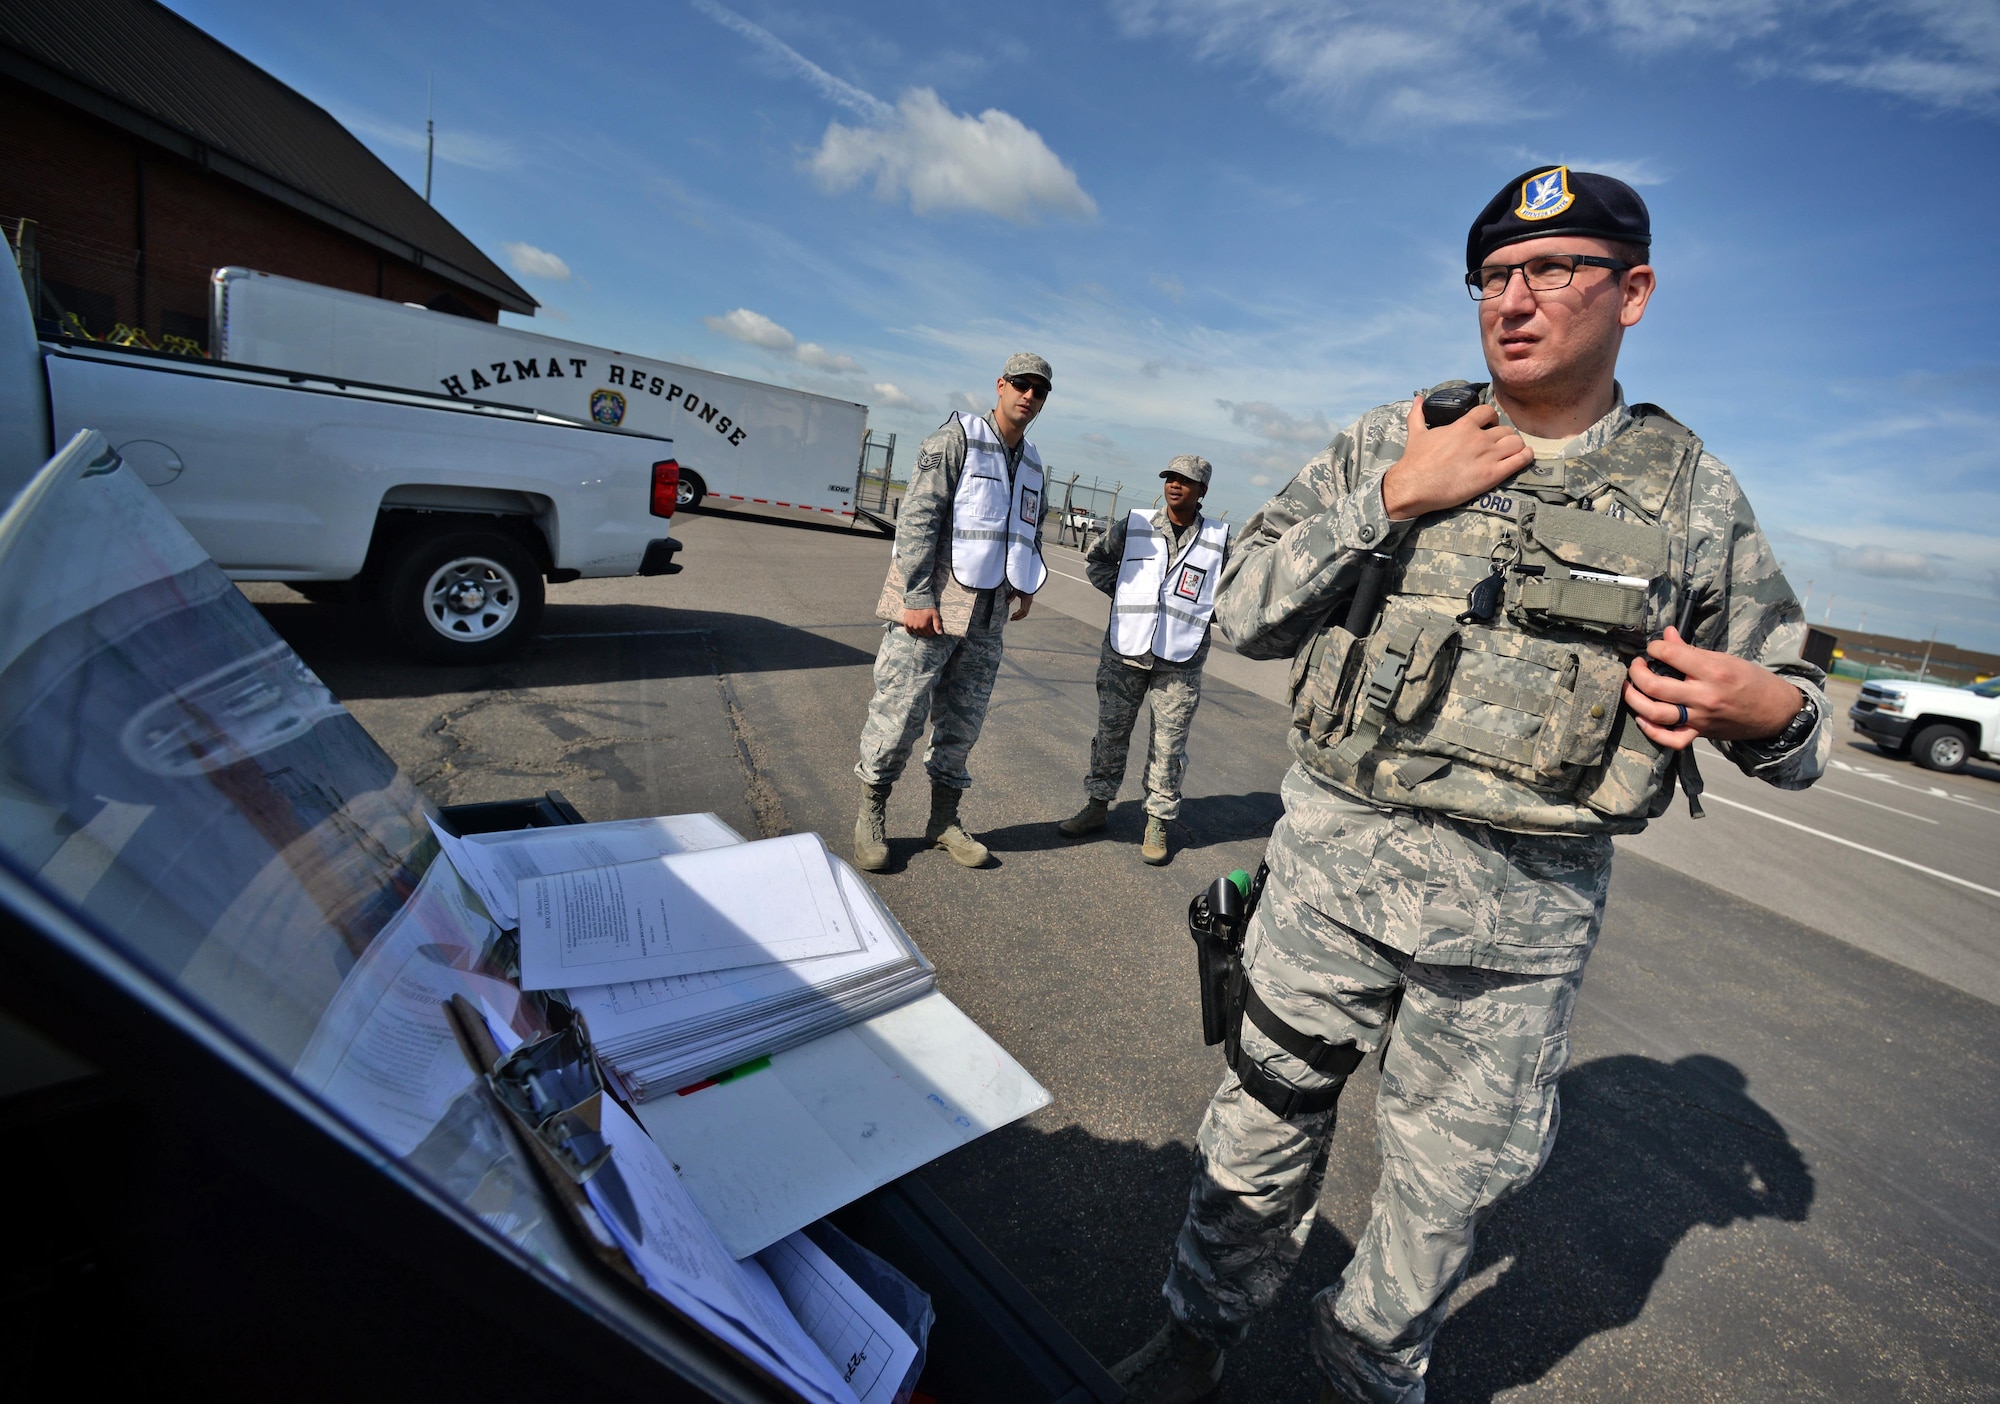 U.S. Air Force Tech. Sgt. Robert Woodford, 100th Security Forces Squadron flight chief, coordinates SFS response during an exercise July 16, 2016, on RAF Mildenhall, England. The exercise tested Team Mildenhall first responders during a simulated fuel spill. (U.S. Air Force photo by Senior Airman Christine Halan) 